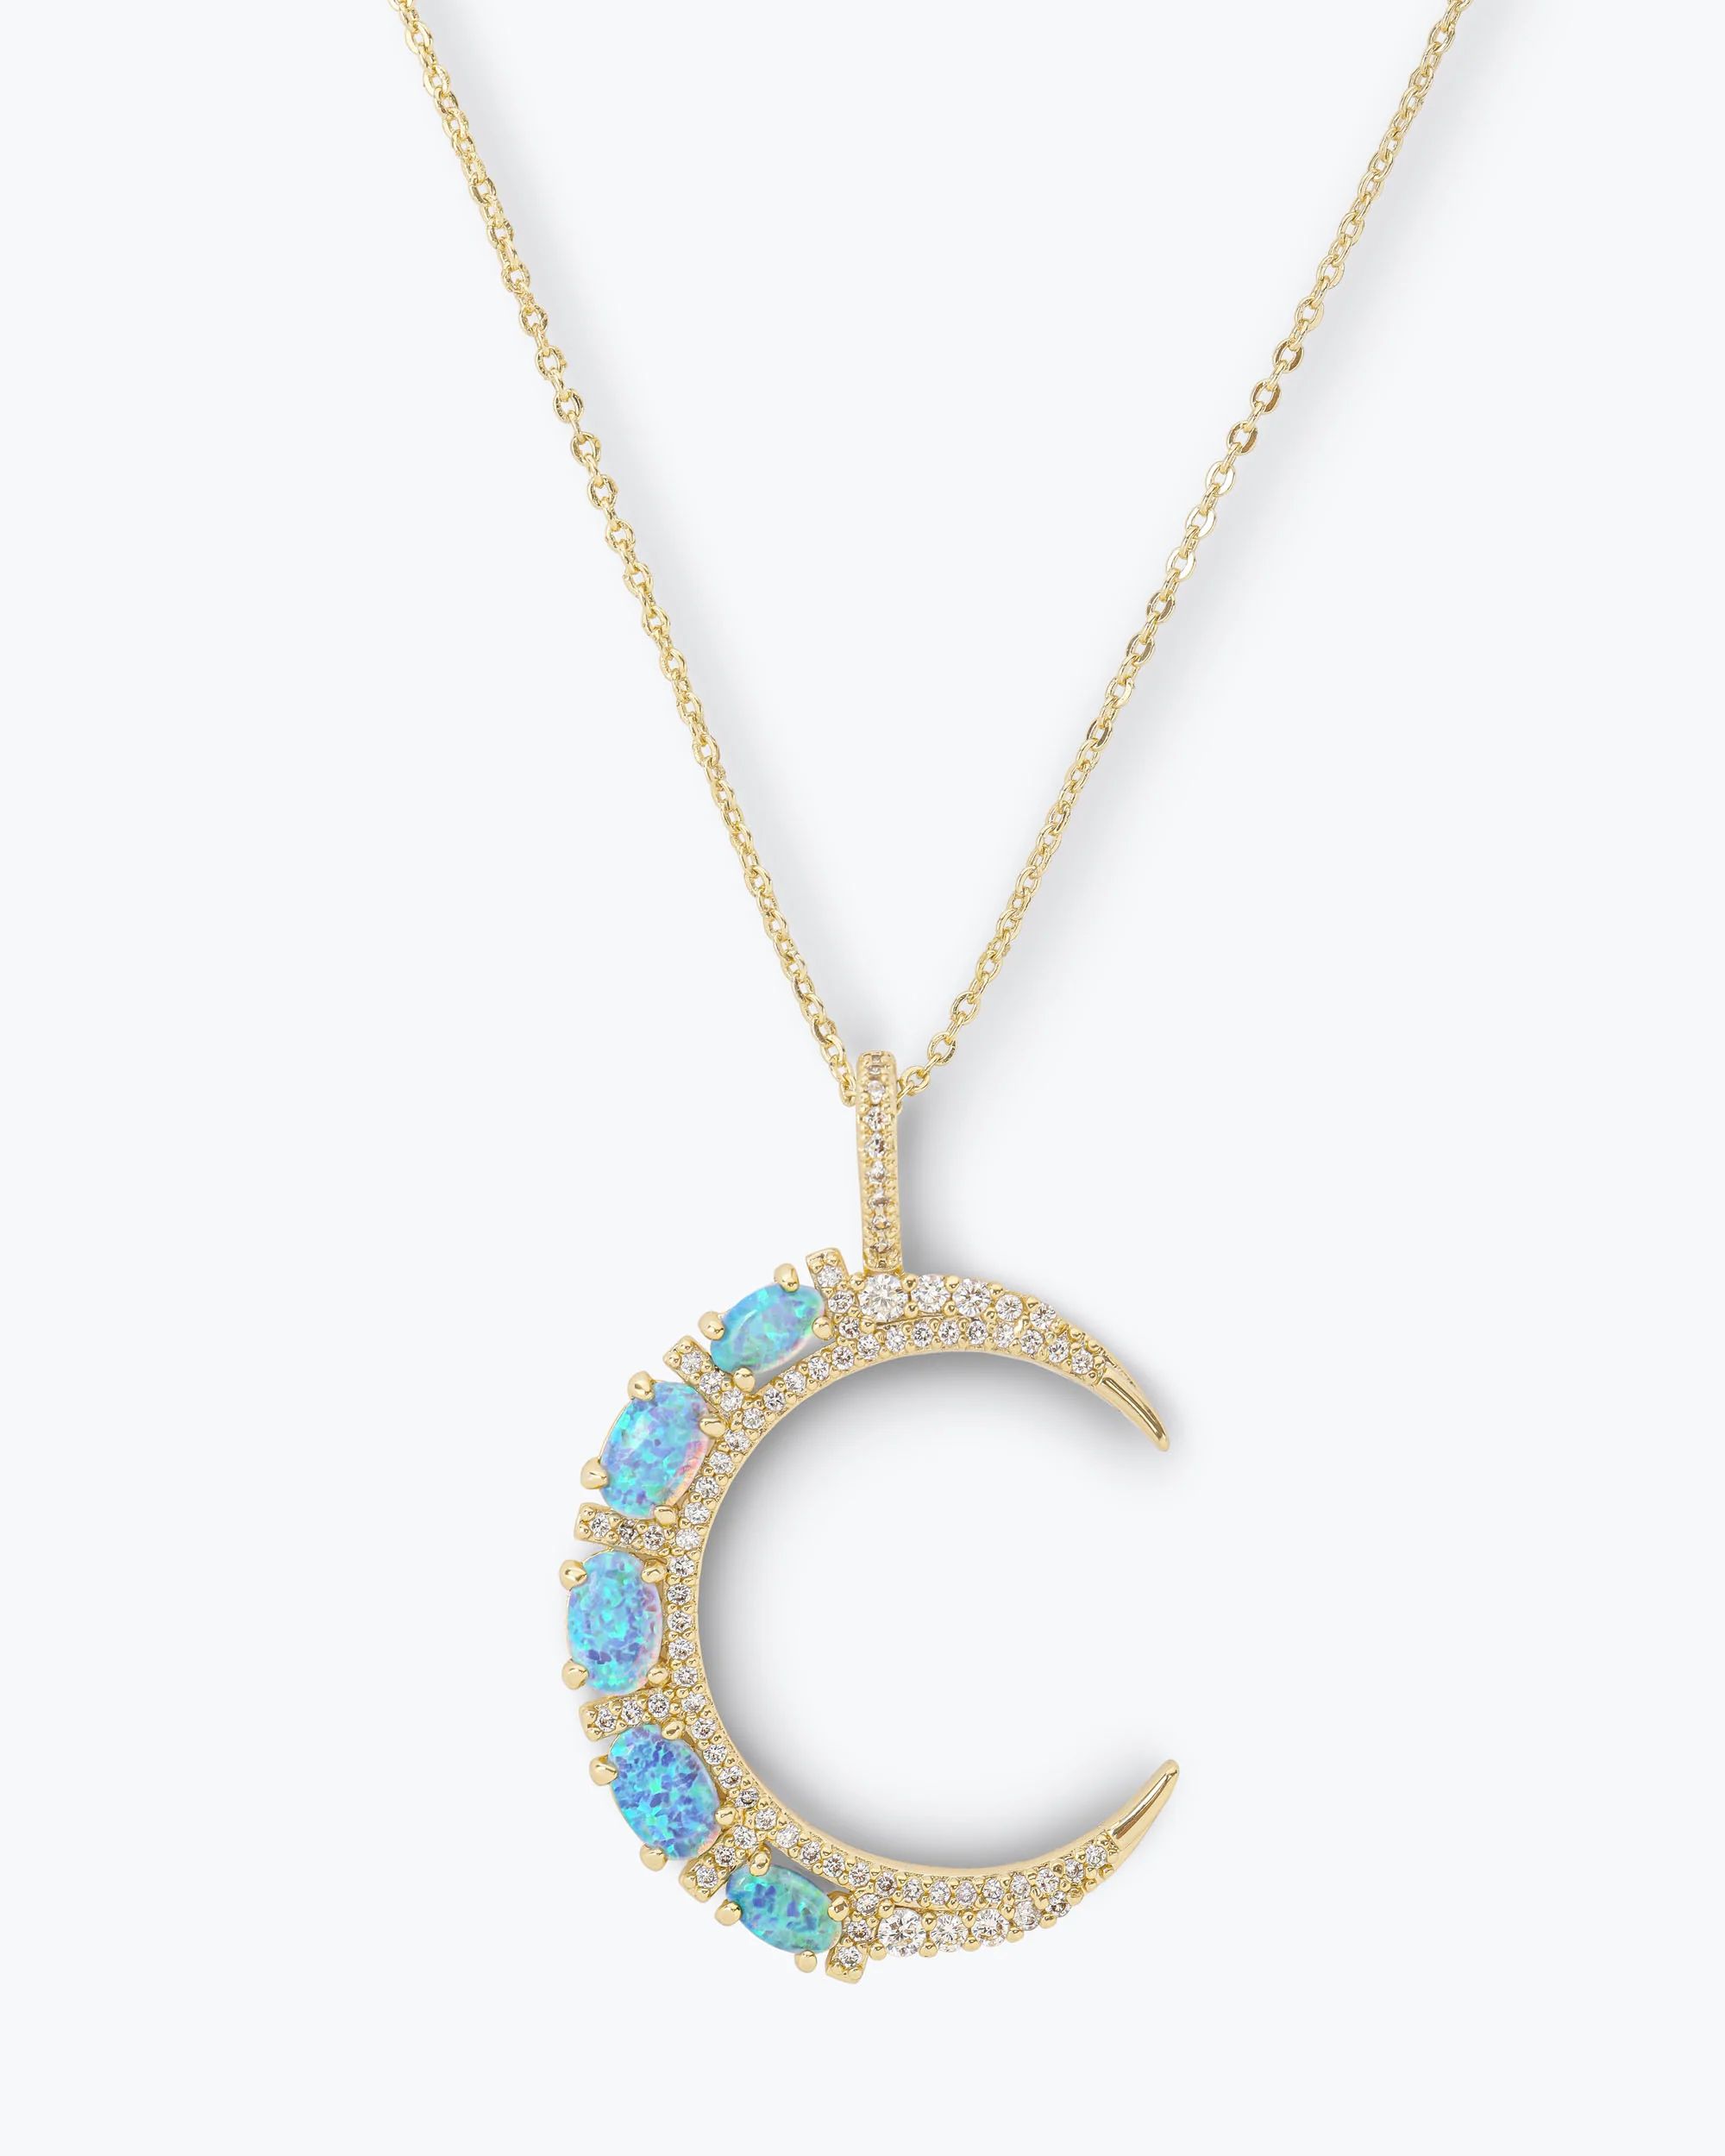 She's an Icon Blue Moon Necklace - Gold|Blue Opal | Melinda Maria